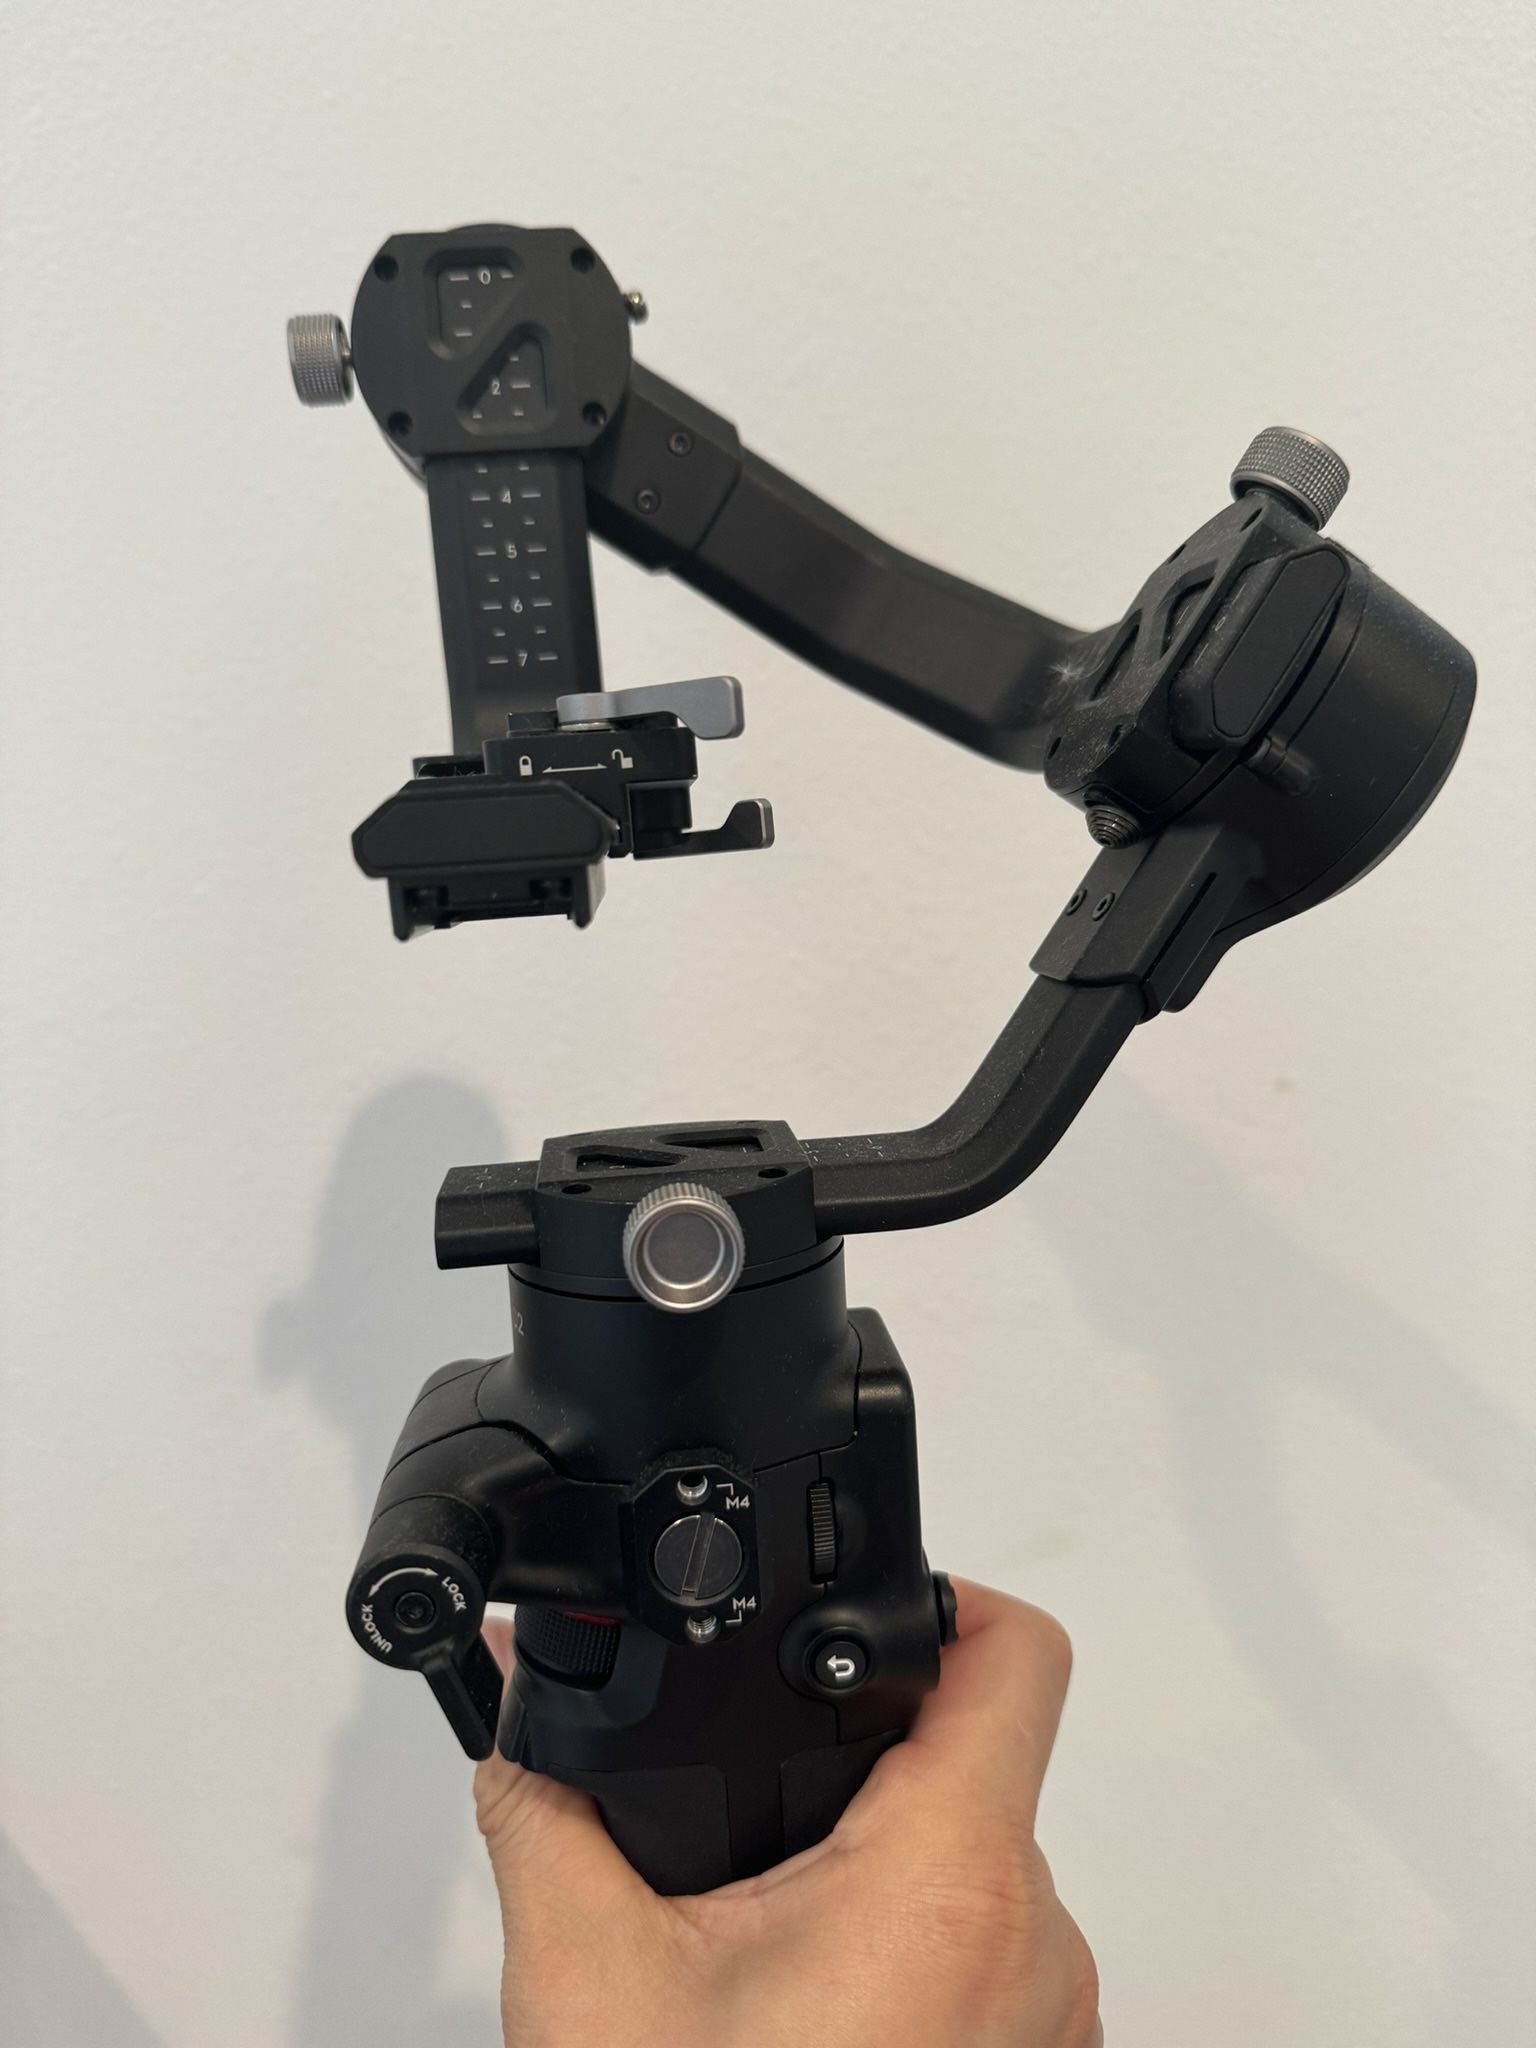 DJI Ronin-SC2, gimbal stabilizer, camera support, handheld gimbal, video stabilization, cinematography tool, content creation, professional videograph